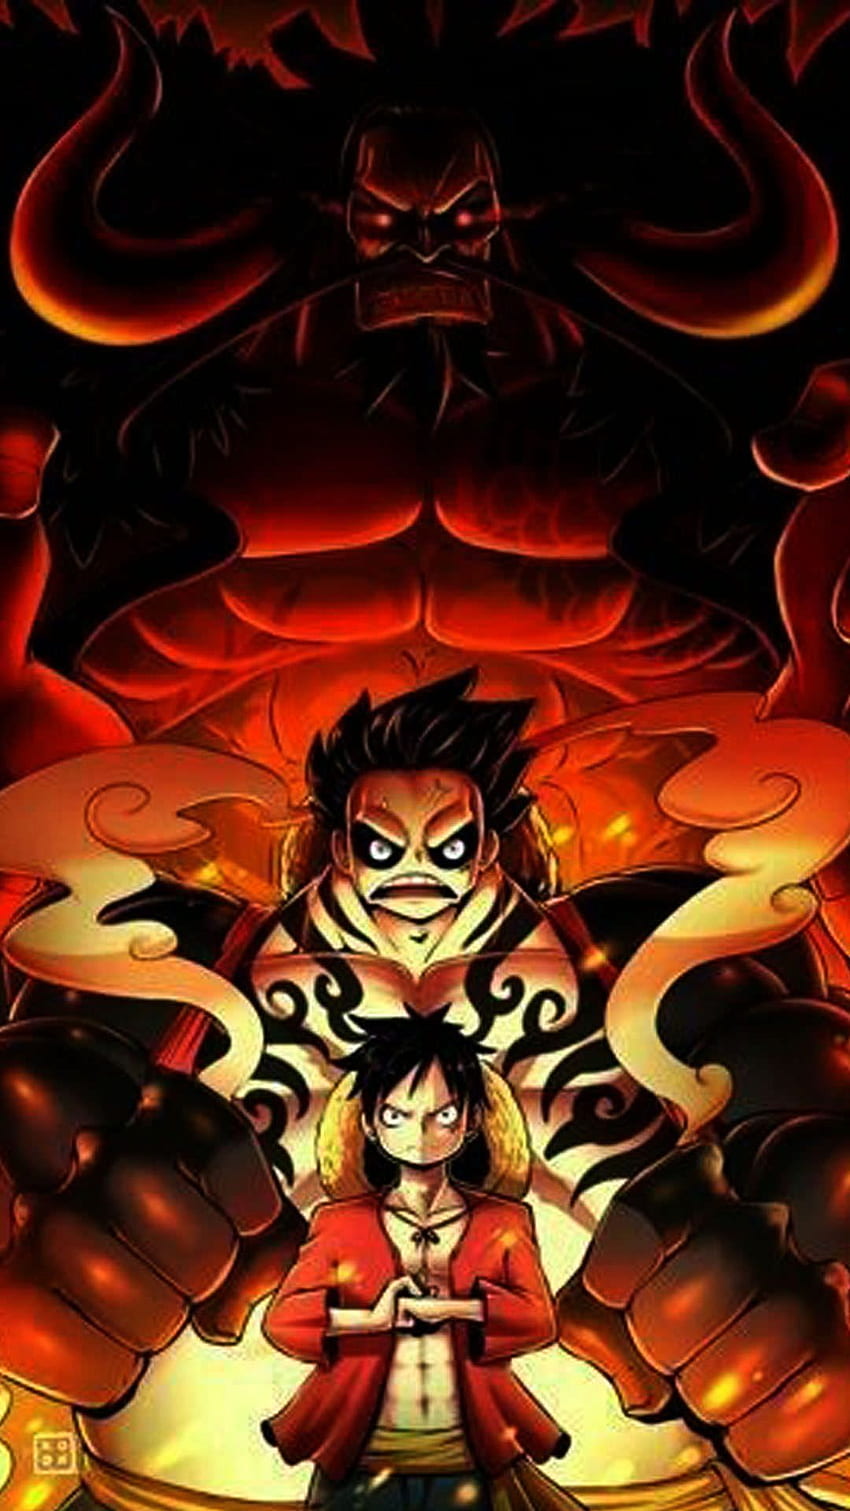 One Piece Gets Special Video For Luffy vs Kaido Fight Climax - Anime Corner